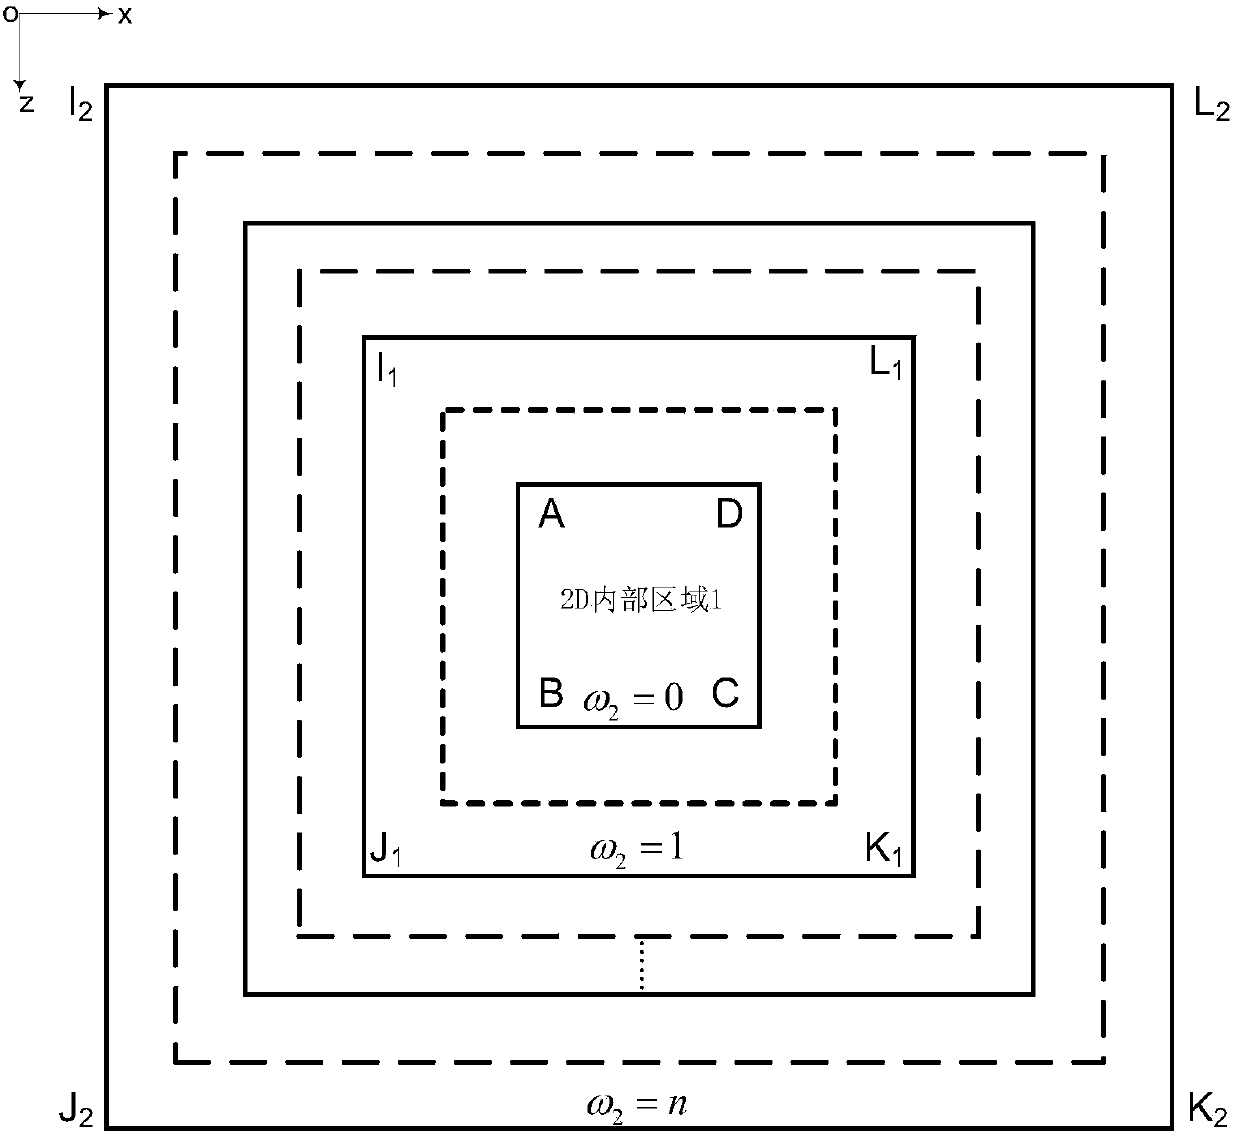 Implementation method for mixed absorbing boundary condition applied to variable density acoustic wave equation